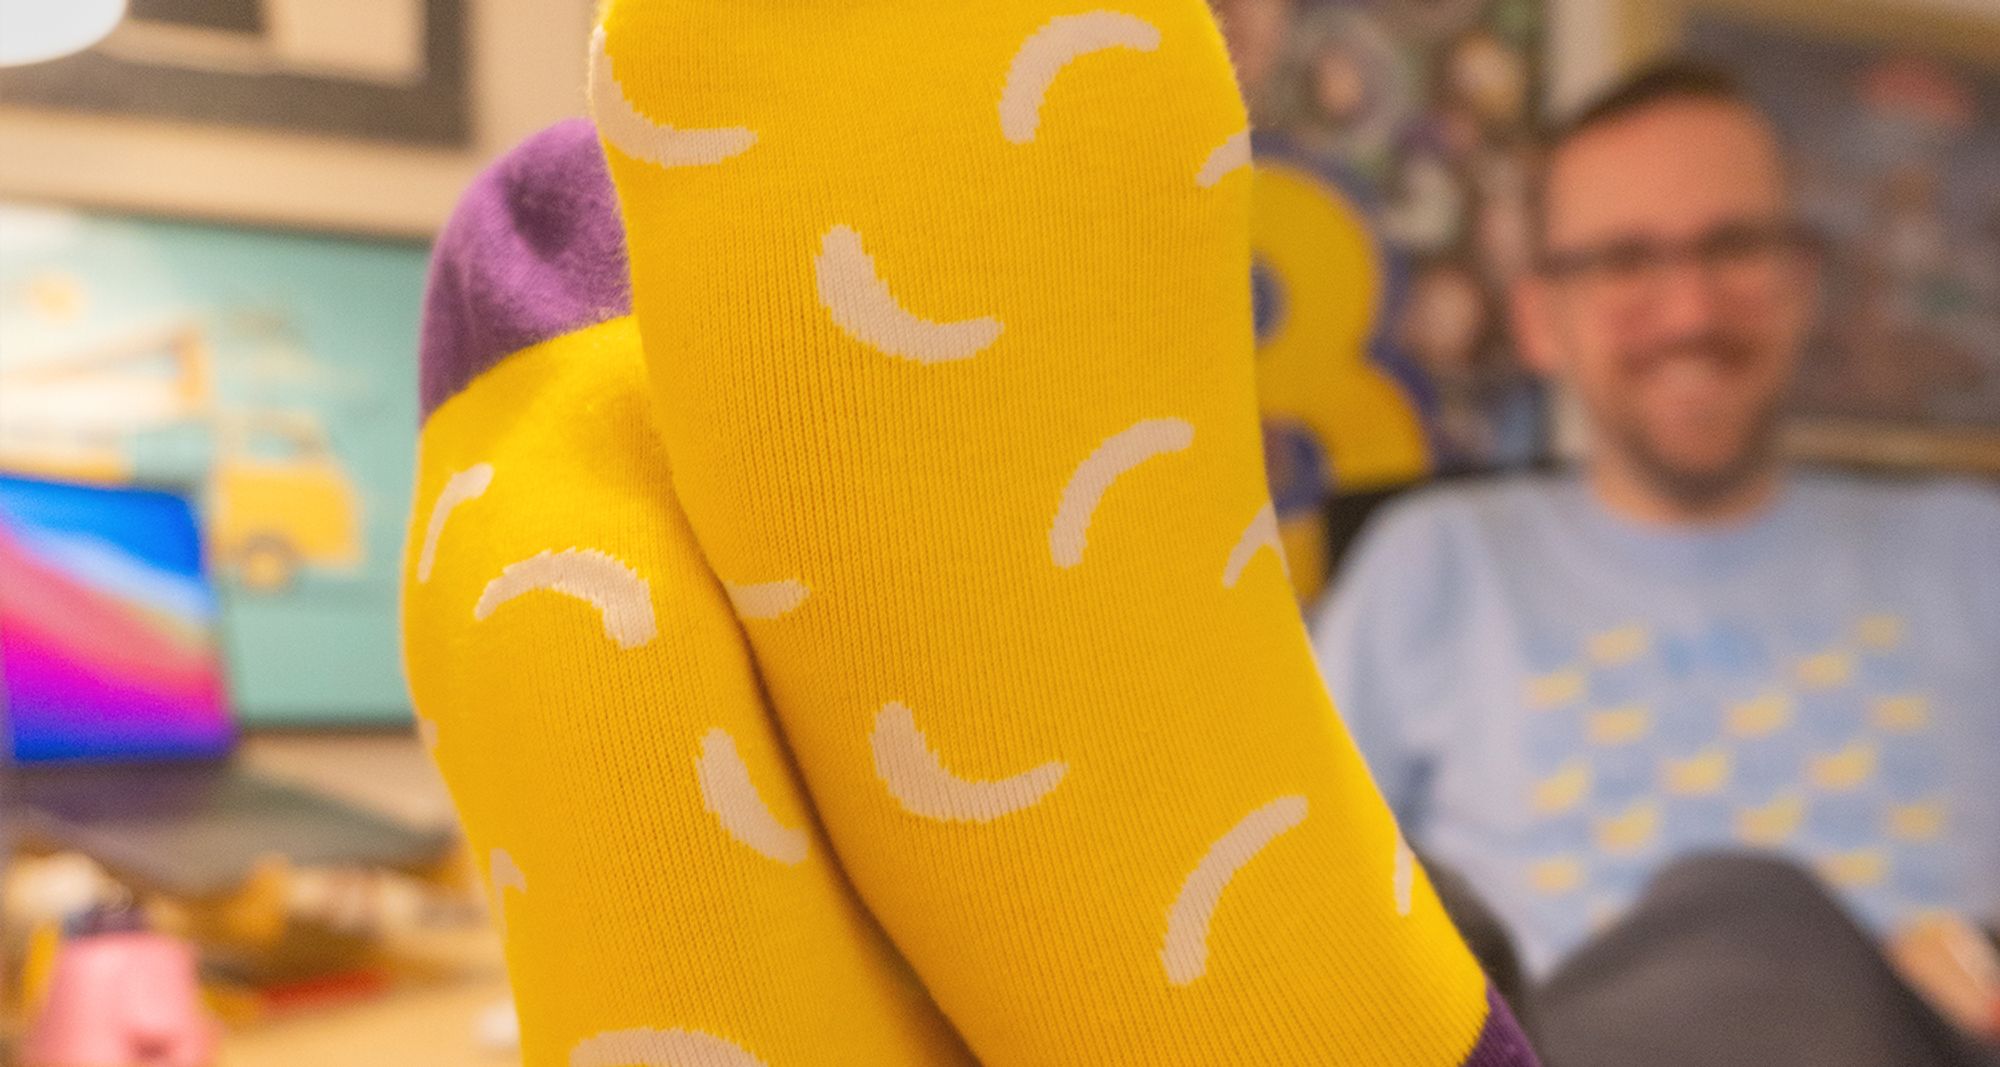 Photo of me with my feet up on the desk, showing off my banana patterned socks